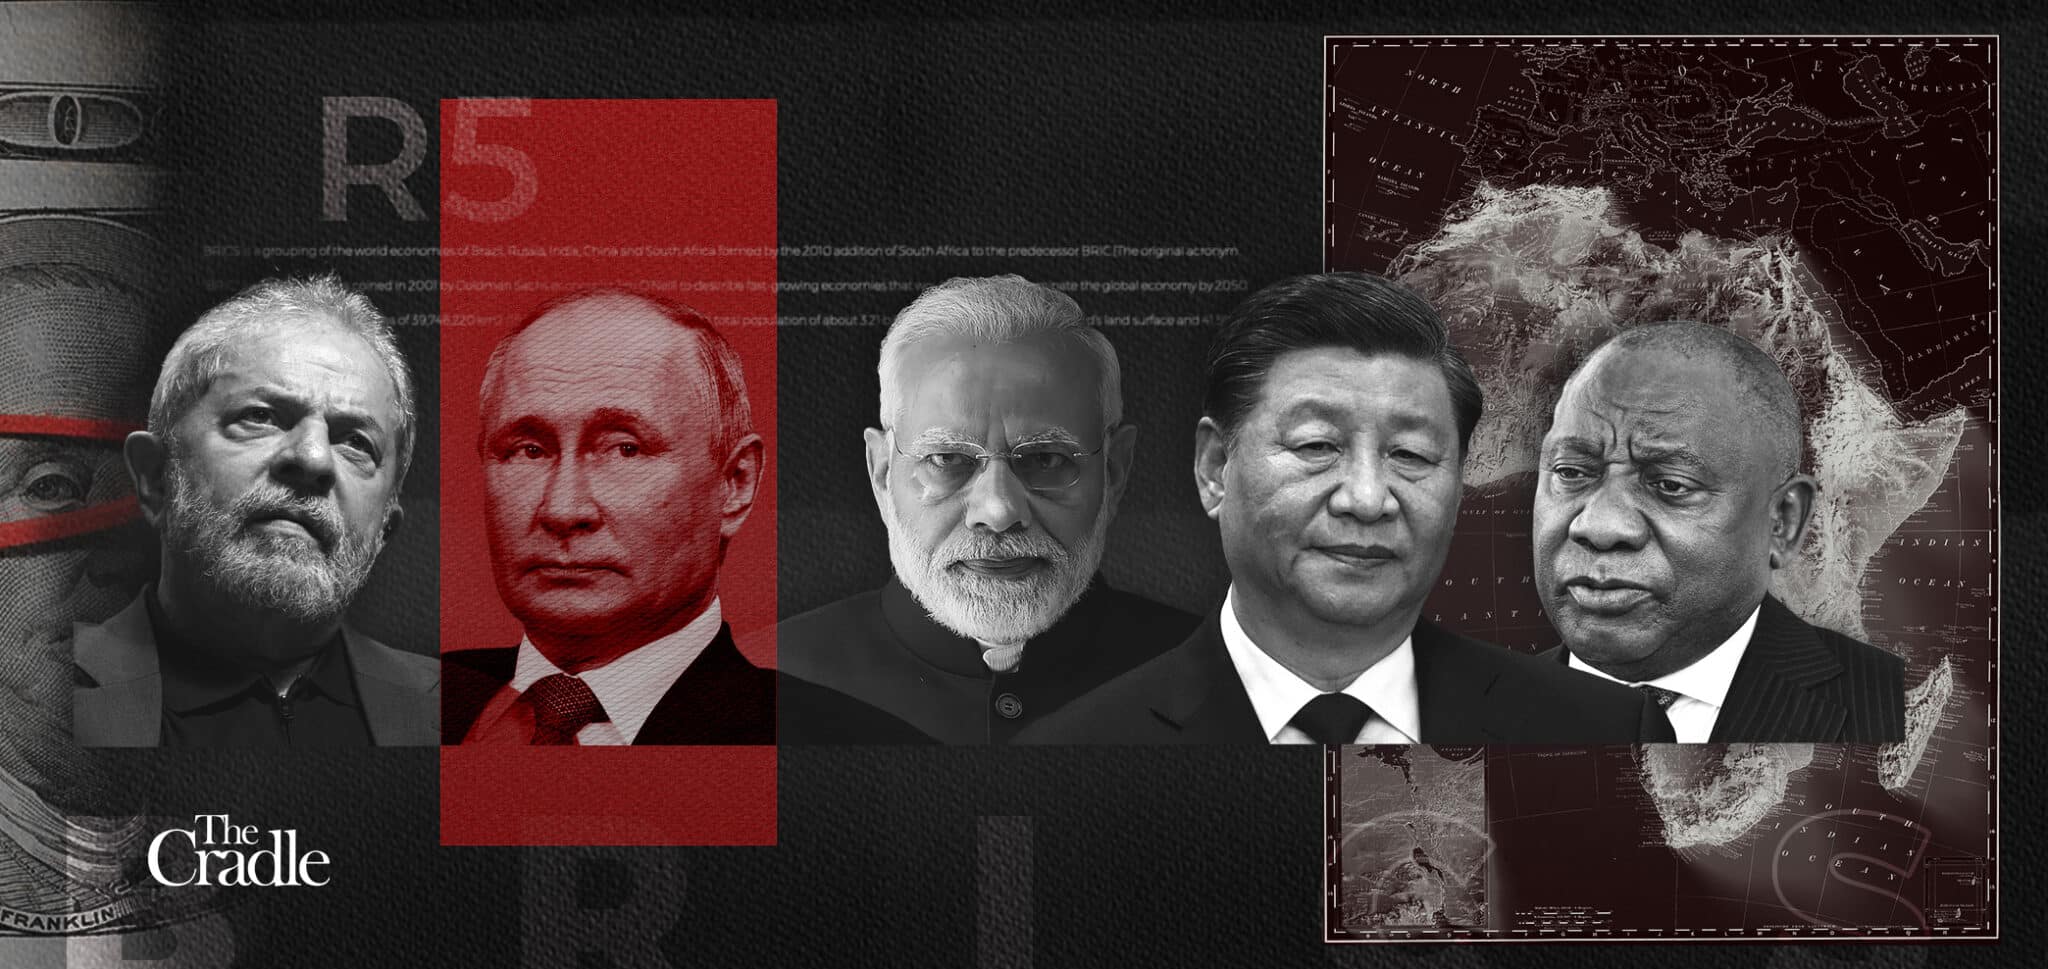 (From left to right) Brazilian President Lula da Silva, Russian President Vladimir Putin, Indian Prime Minister Narendra Modi, Chinese President Xi Jinping, and South African President Cyril Ramaphosa. Photo: The Cradle.